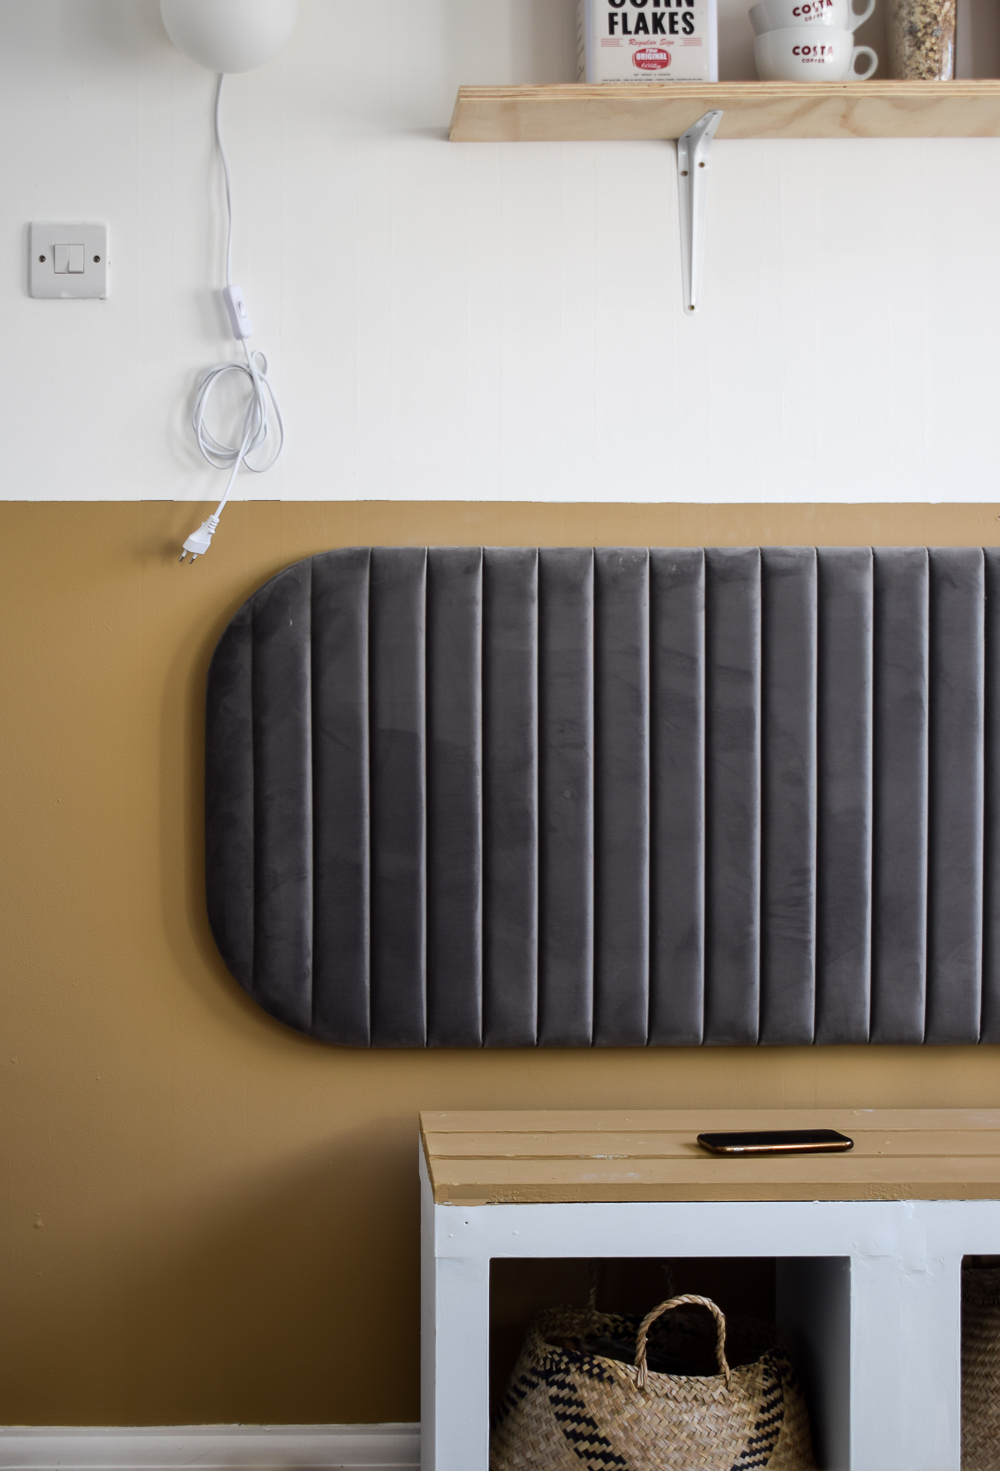 The next home velvet head board applied to the wall above the kallax bench